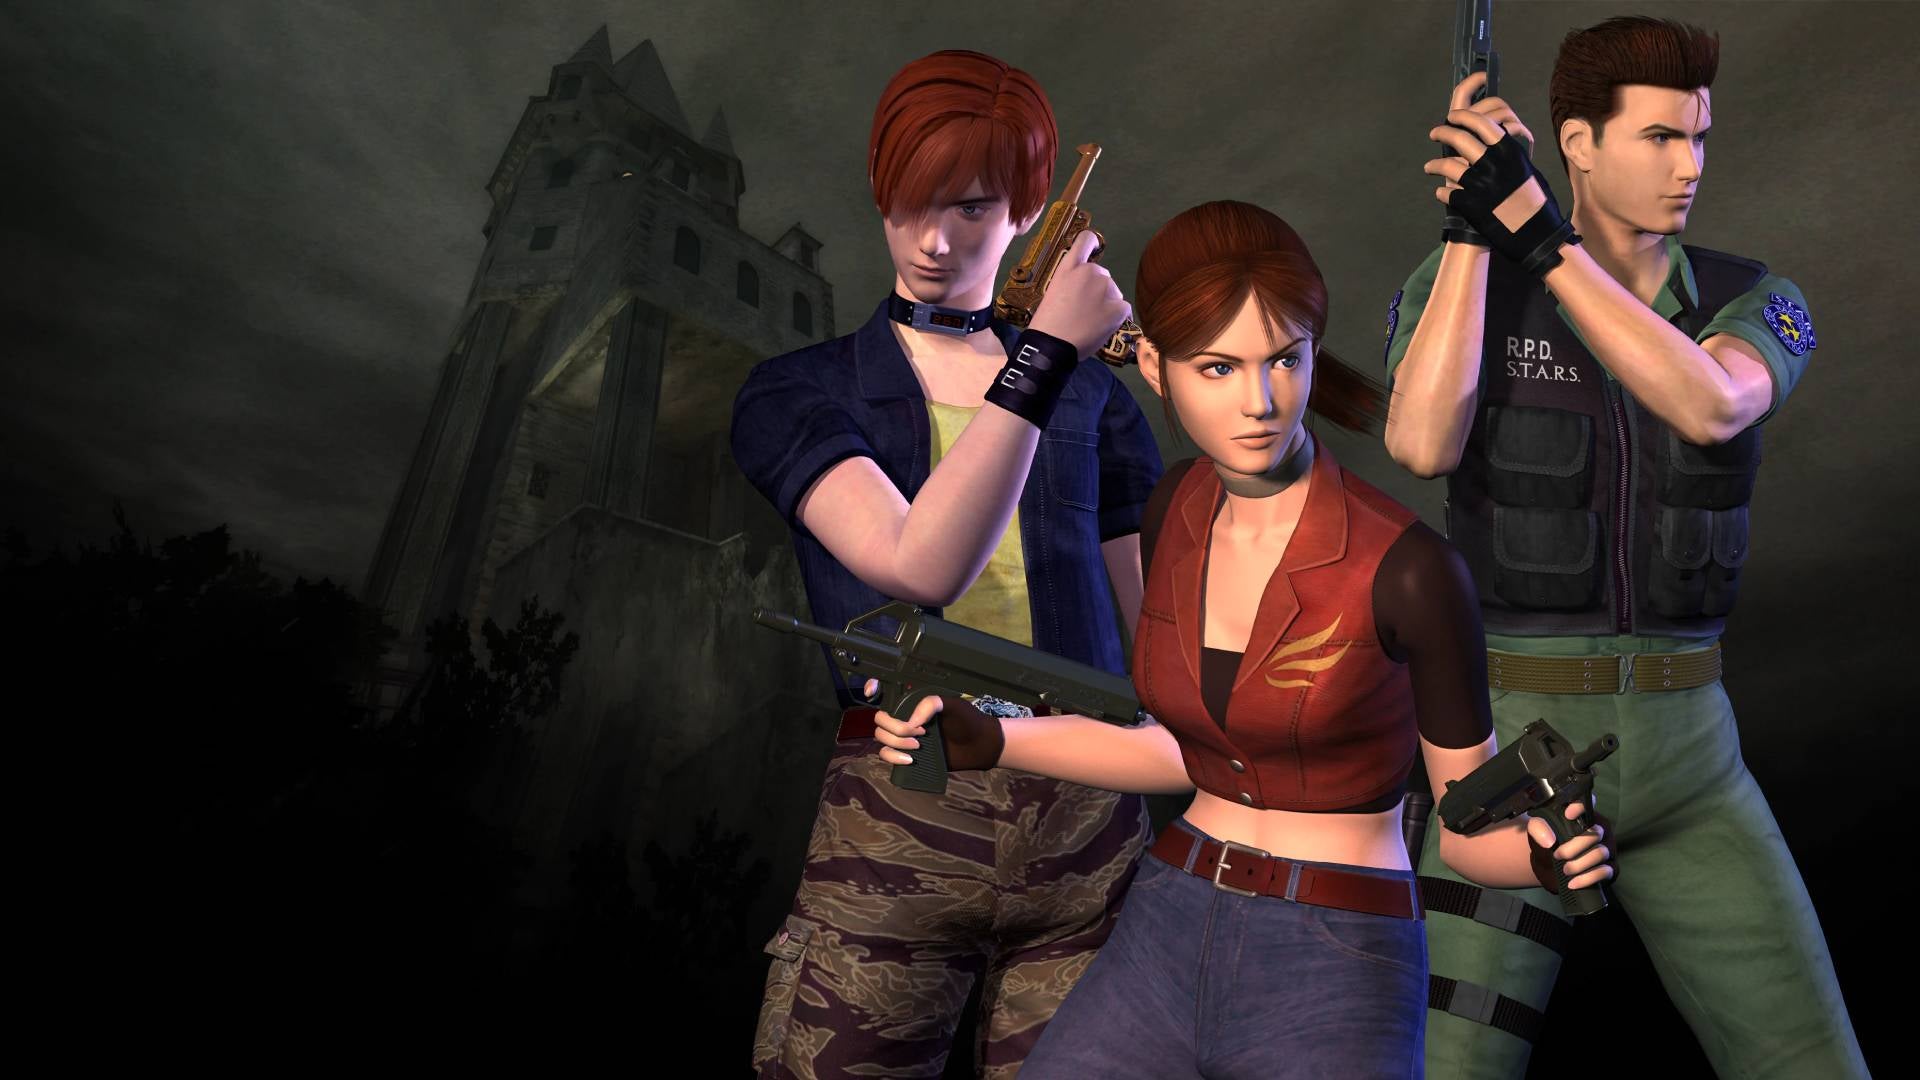 Resident Evil: Code Veronica Is Getting An Impressive Looking Fan